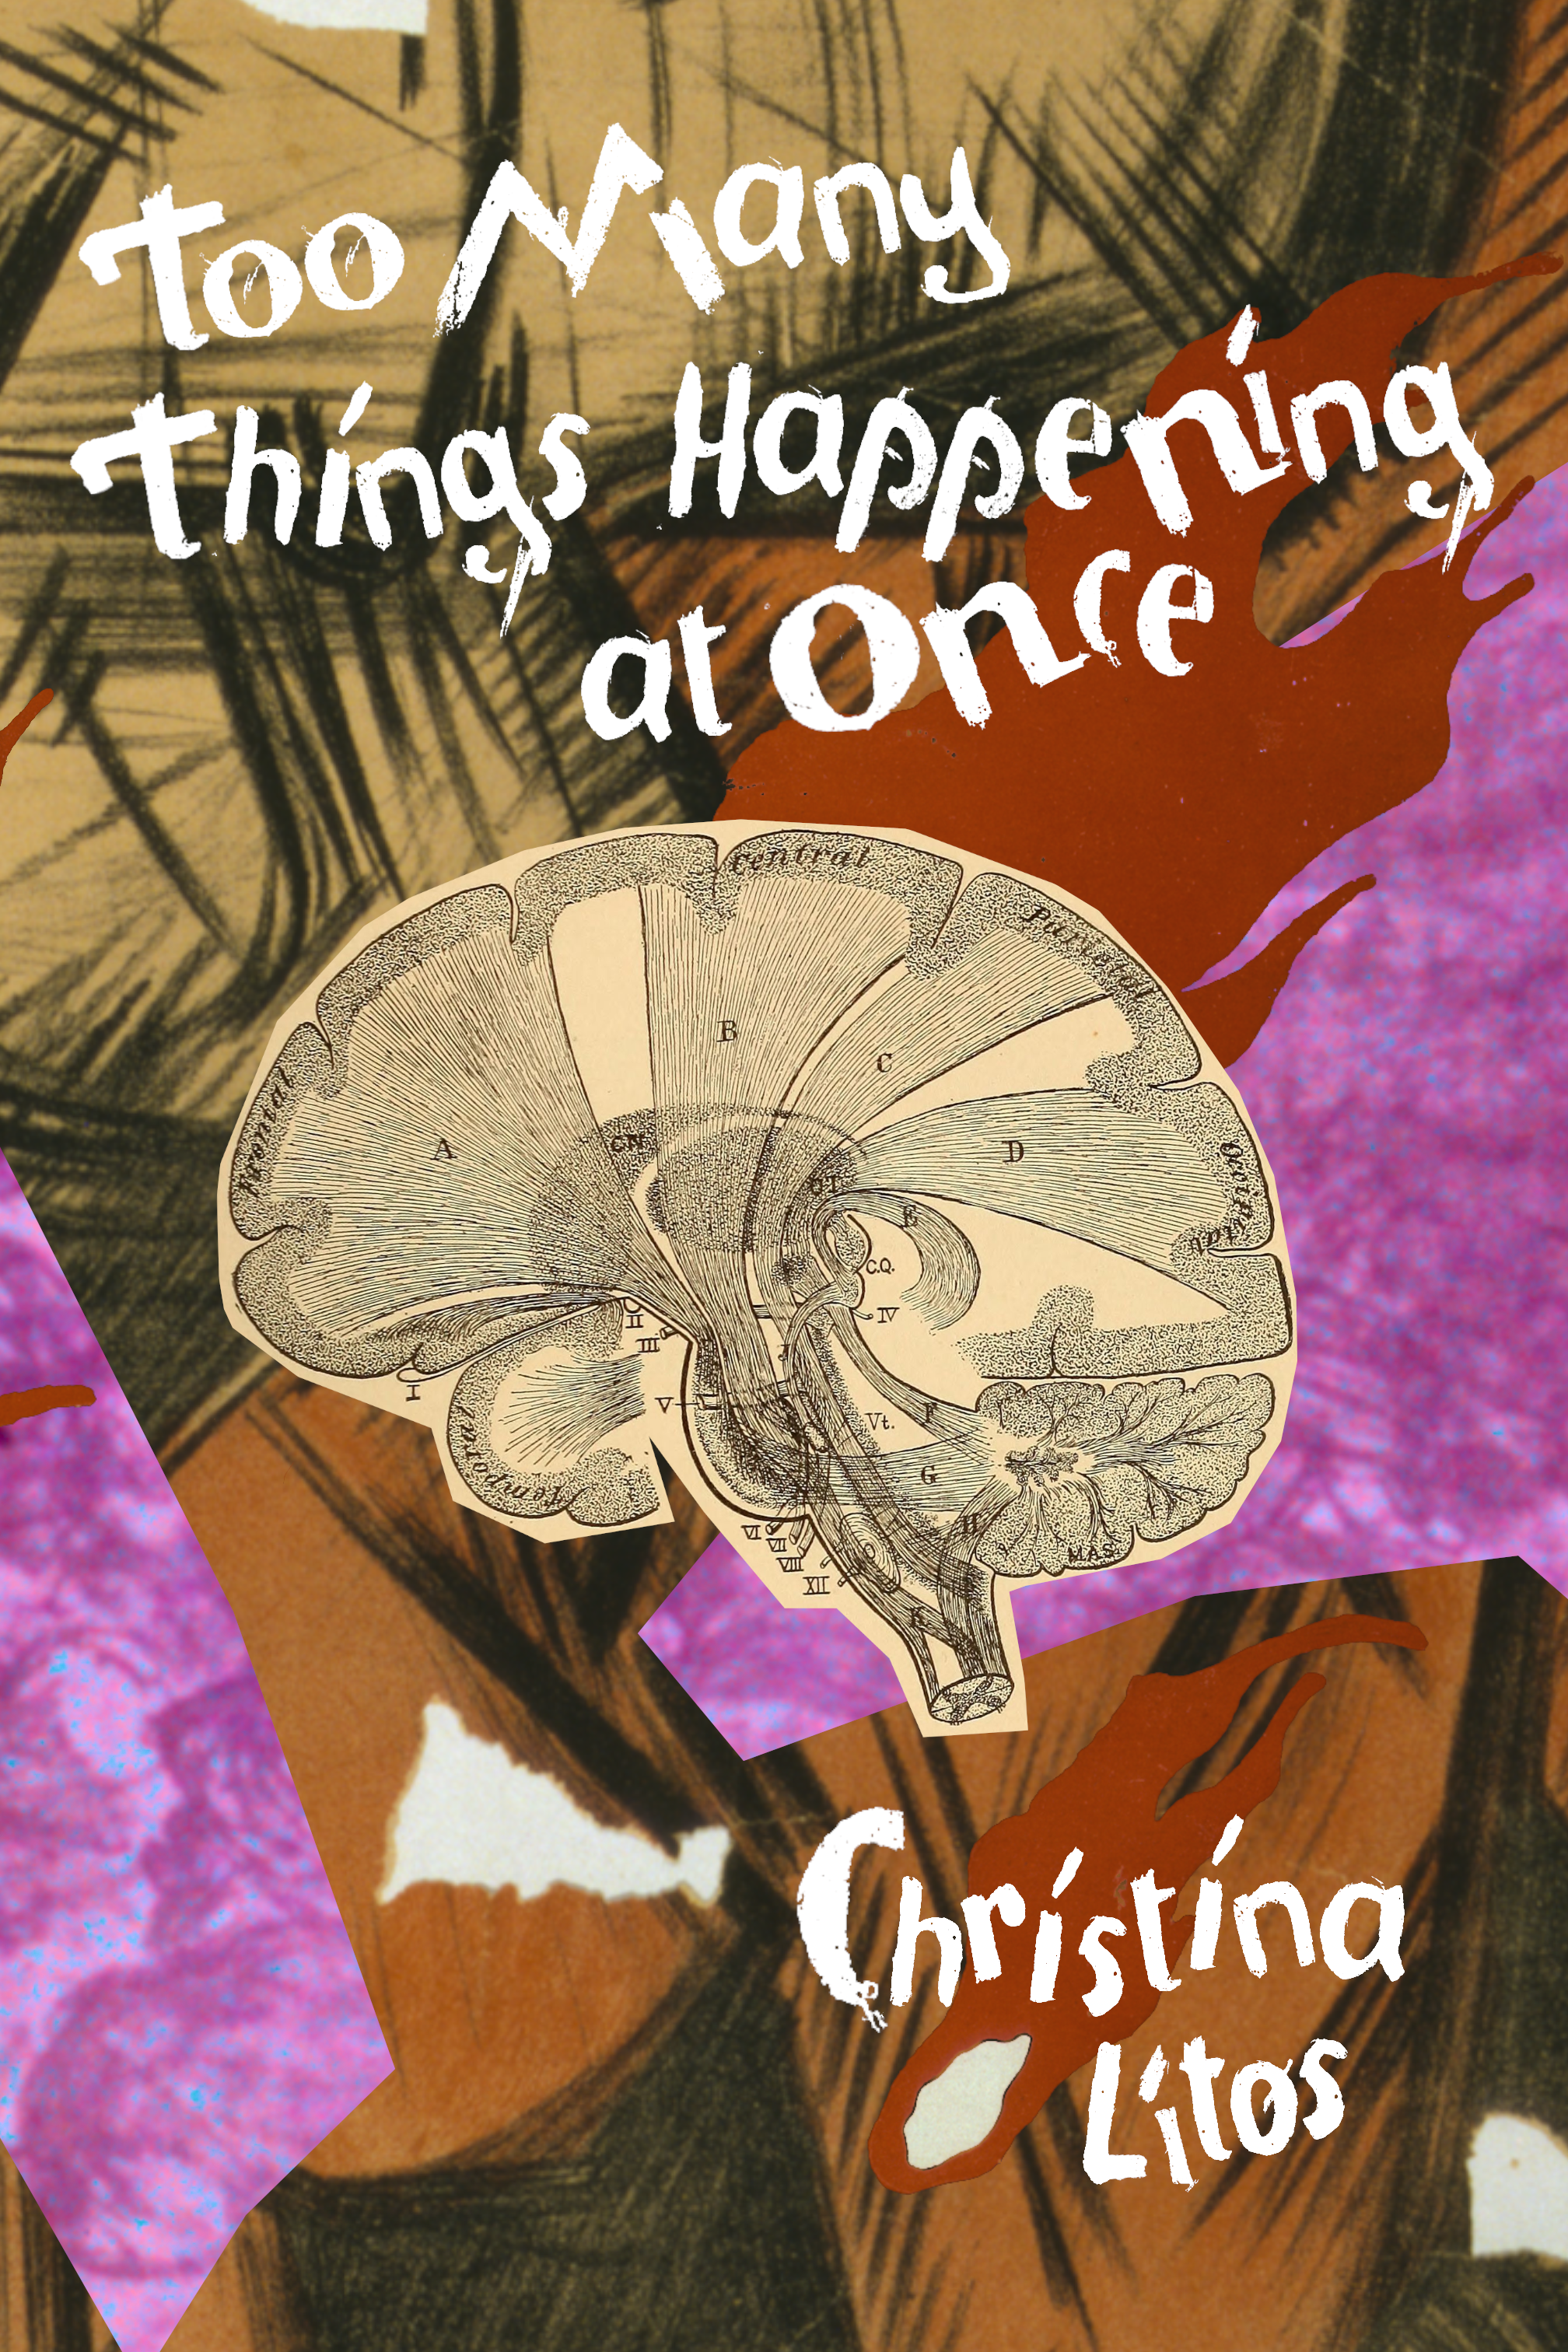 Too Many Things Happening at Once, by Christina Litos - Bottlecap